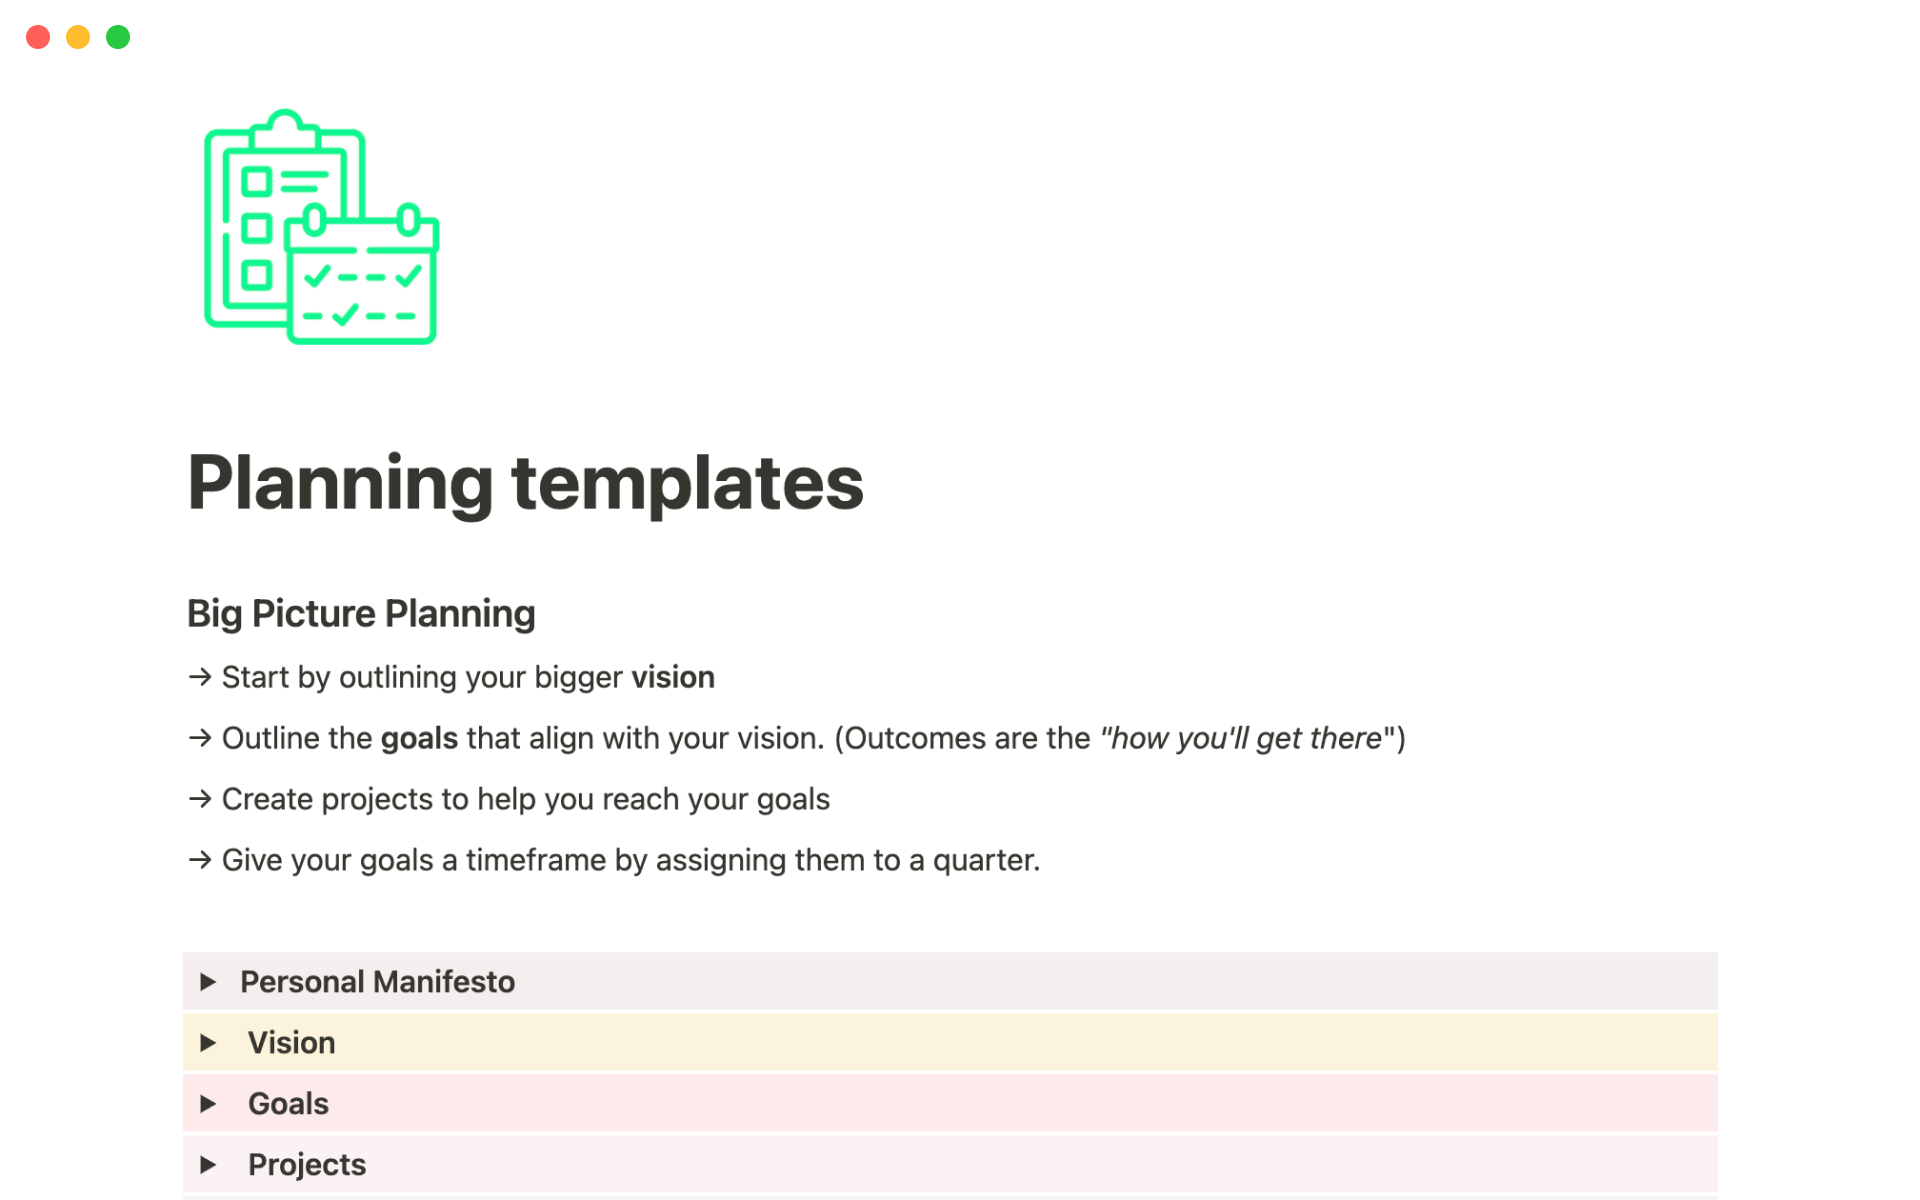 The desktop image for the Planning templates template